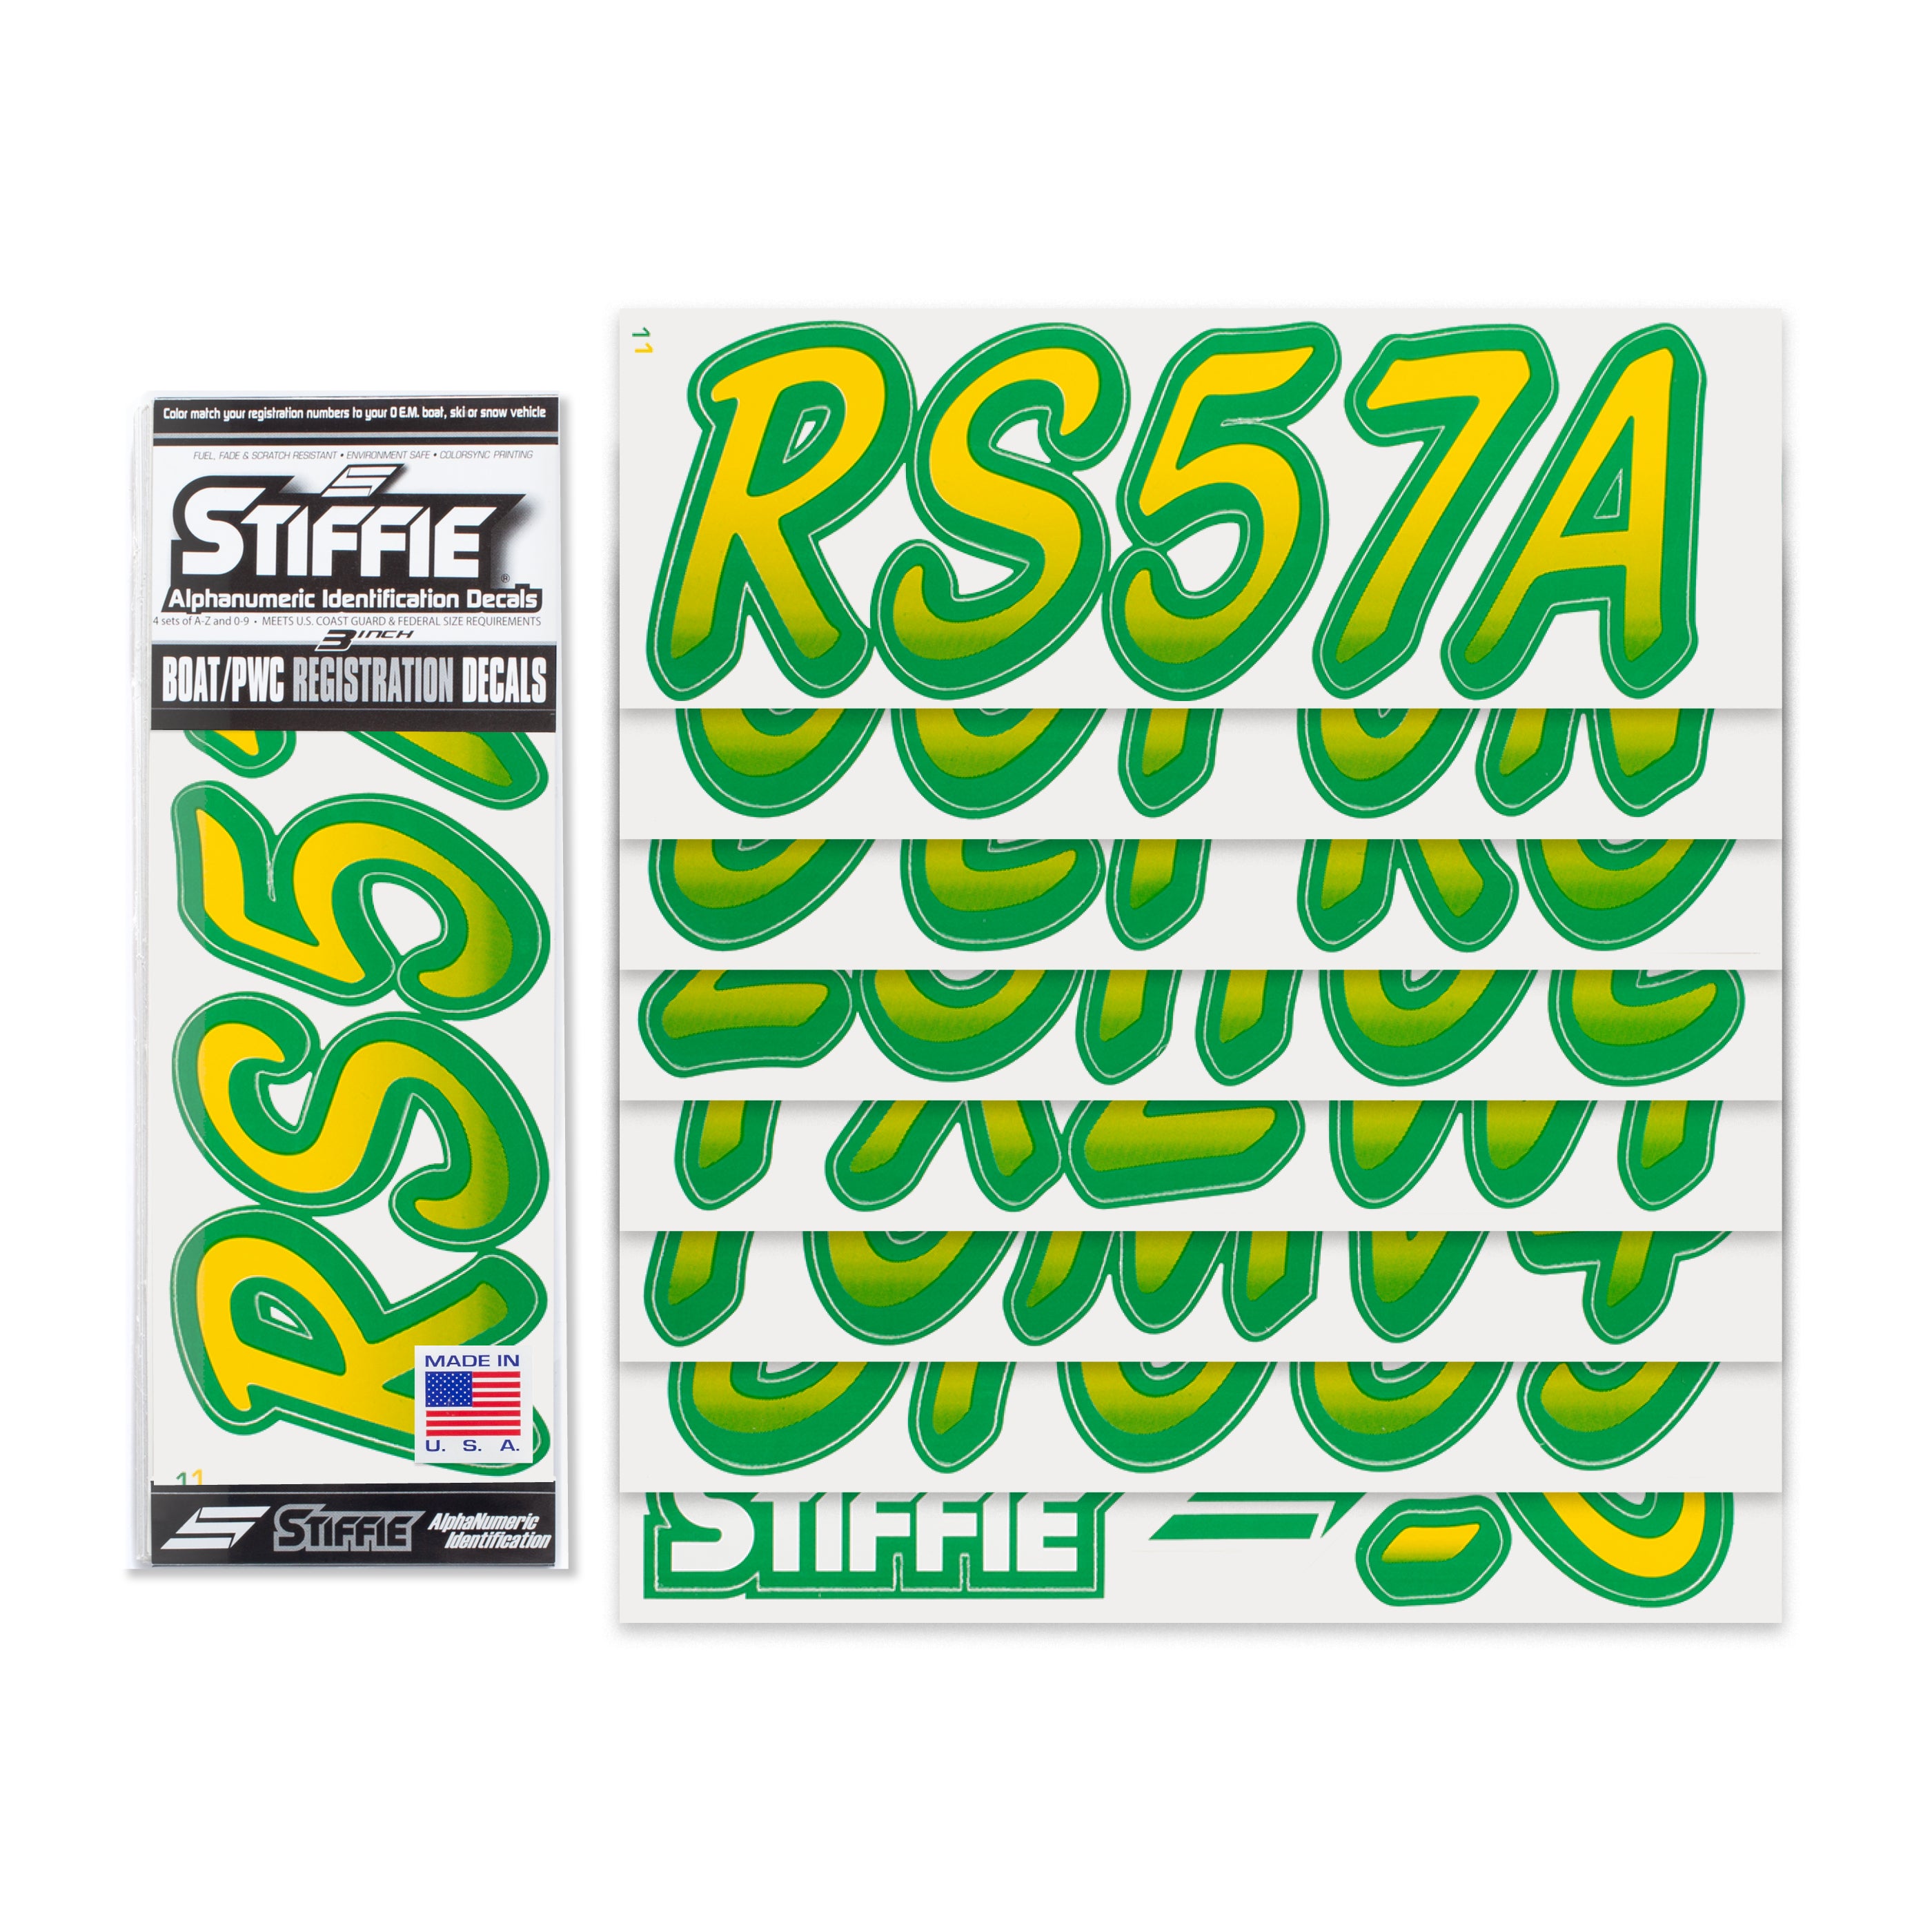 STIFFIE Whipline Yellow/Green 3" Alpha-Numeric Registration Identification Numbers Stickers Decals for Boats & Personal Watercraft